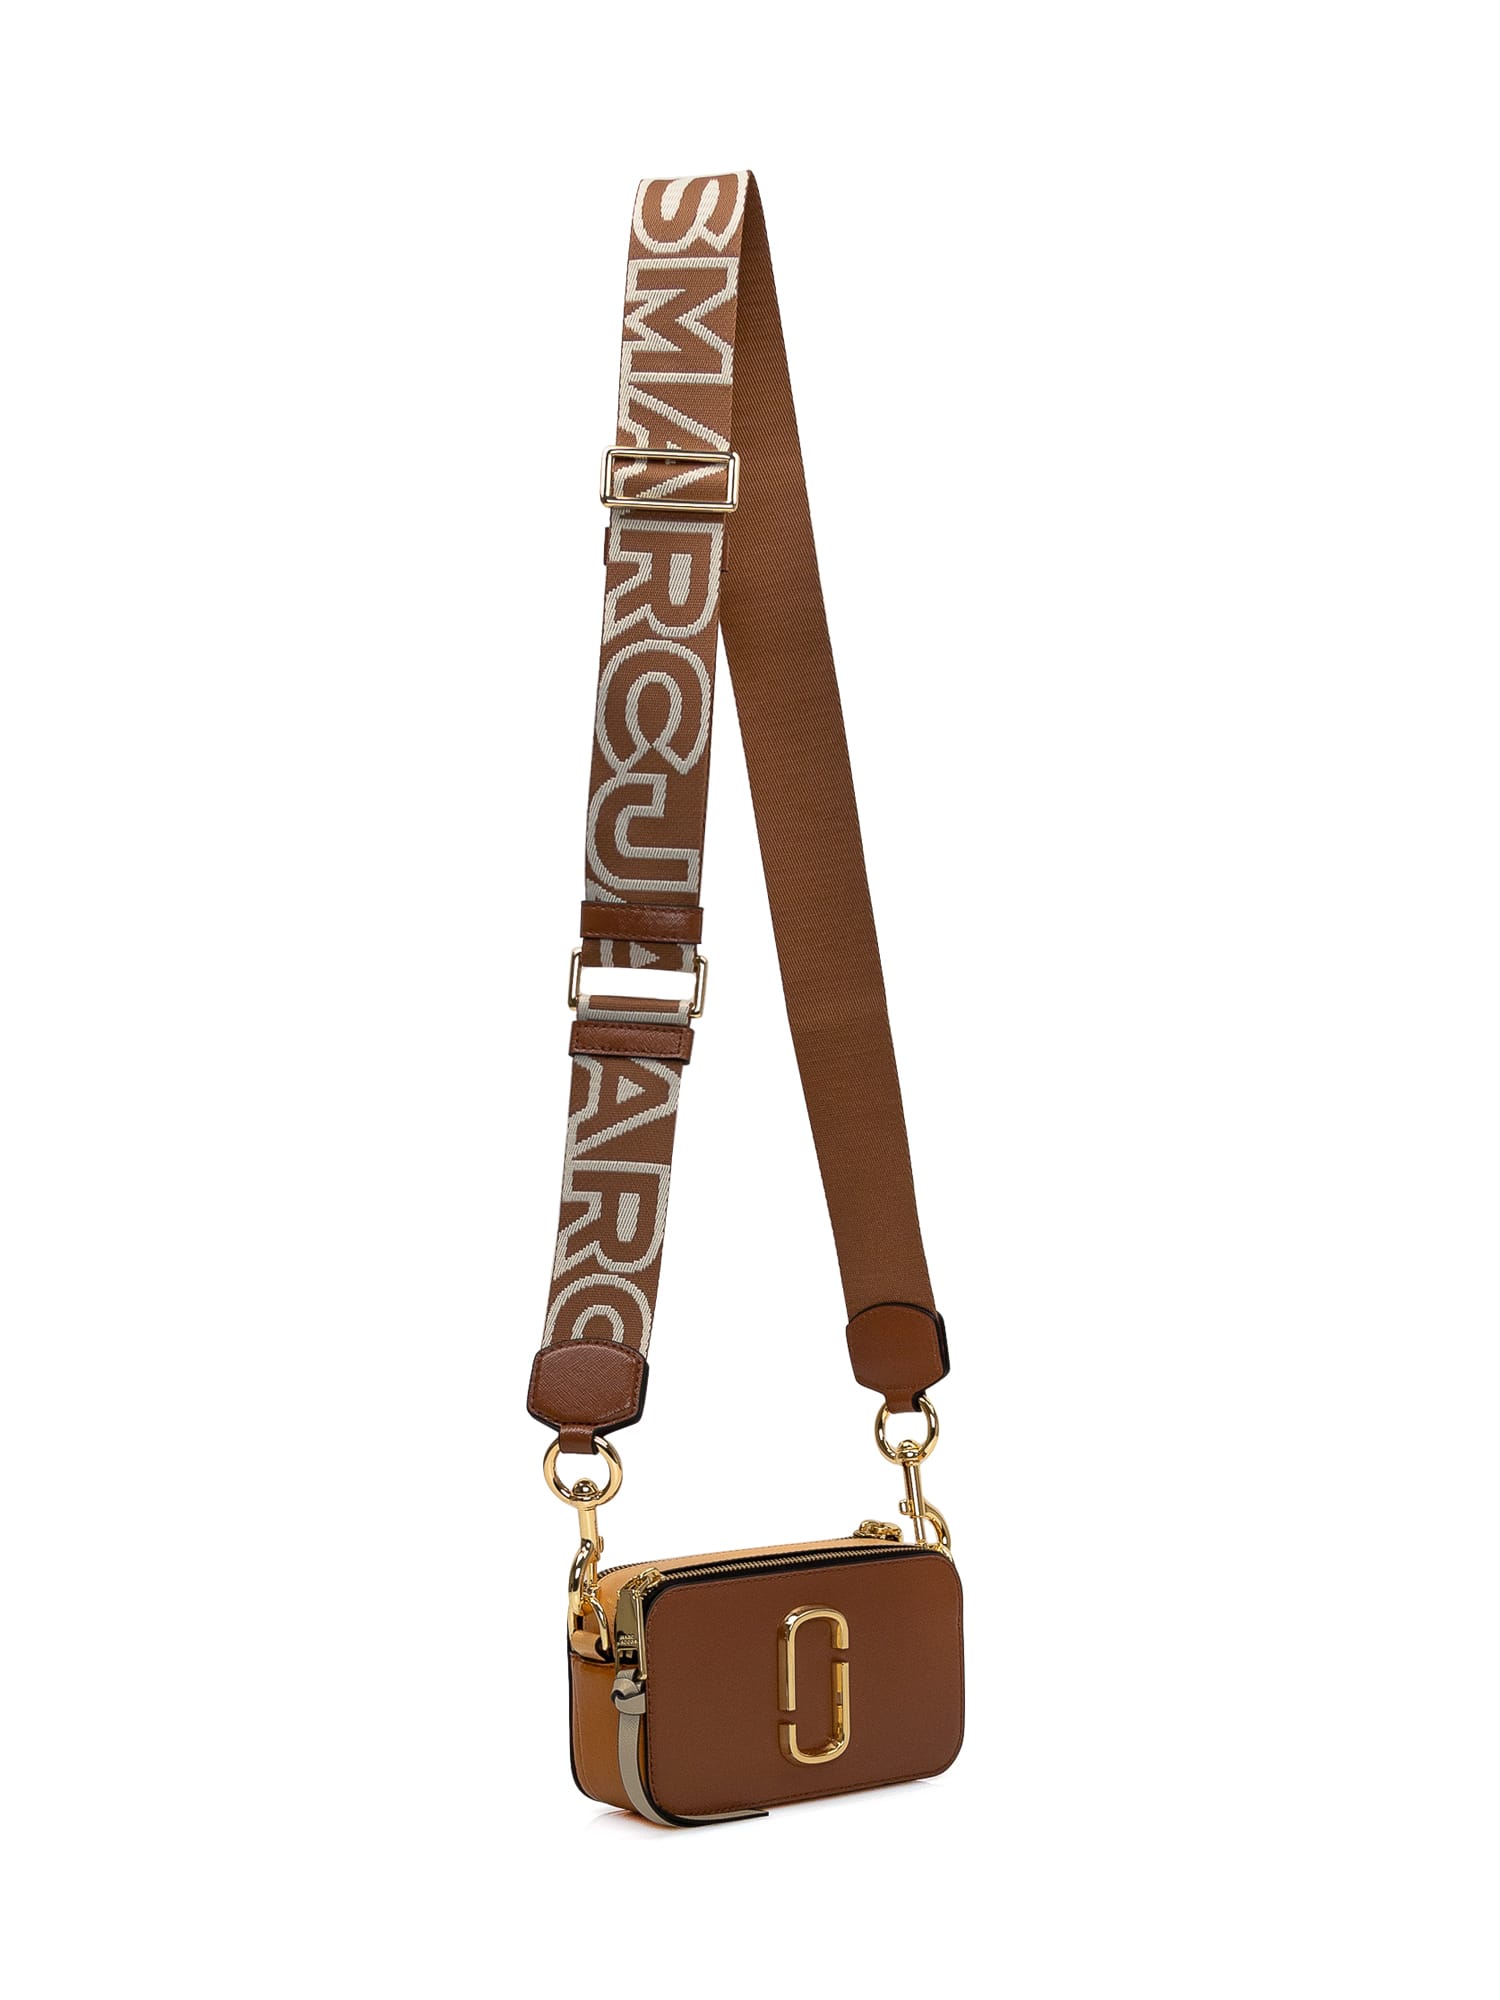 Marc Jacobs Snapshot Bag In Argan Color Leather in Brown